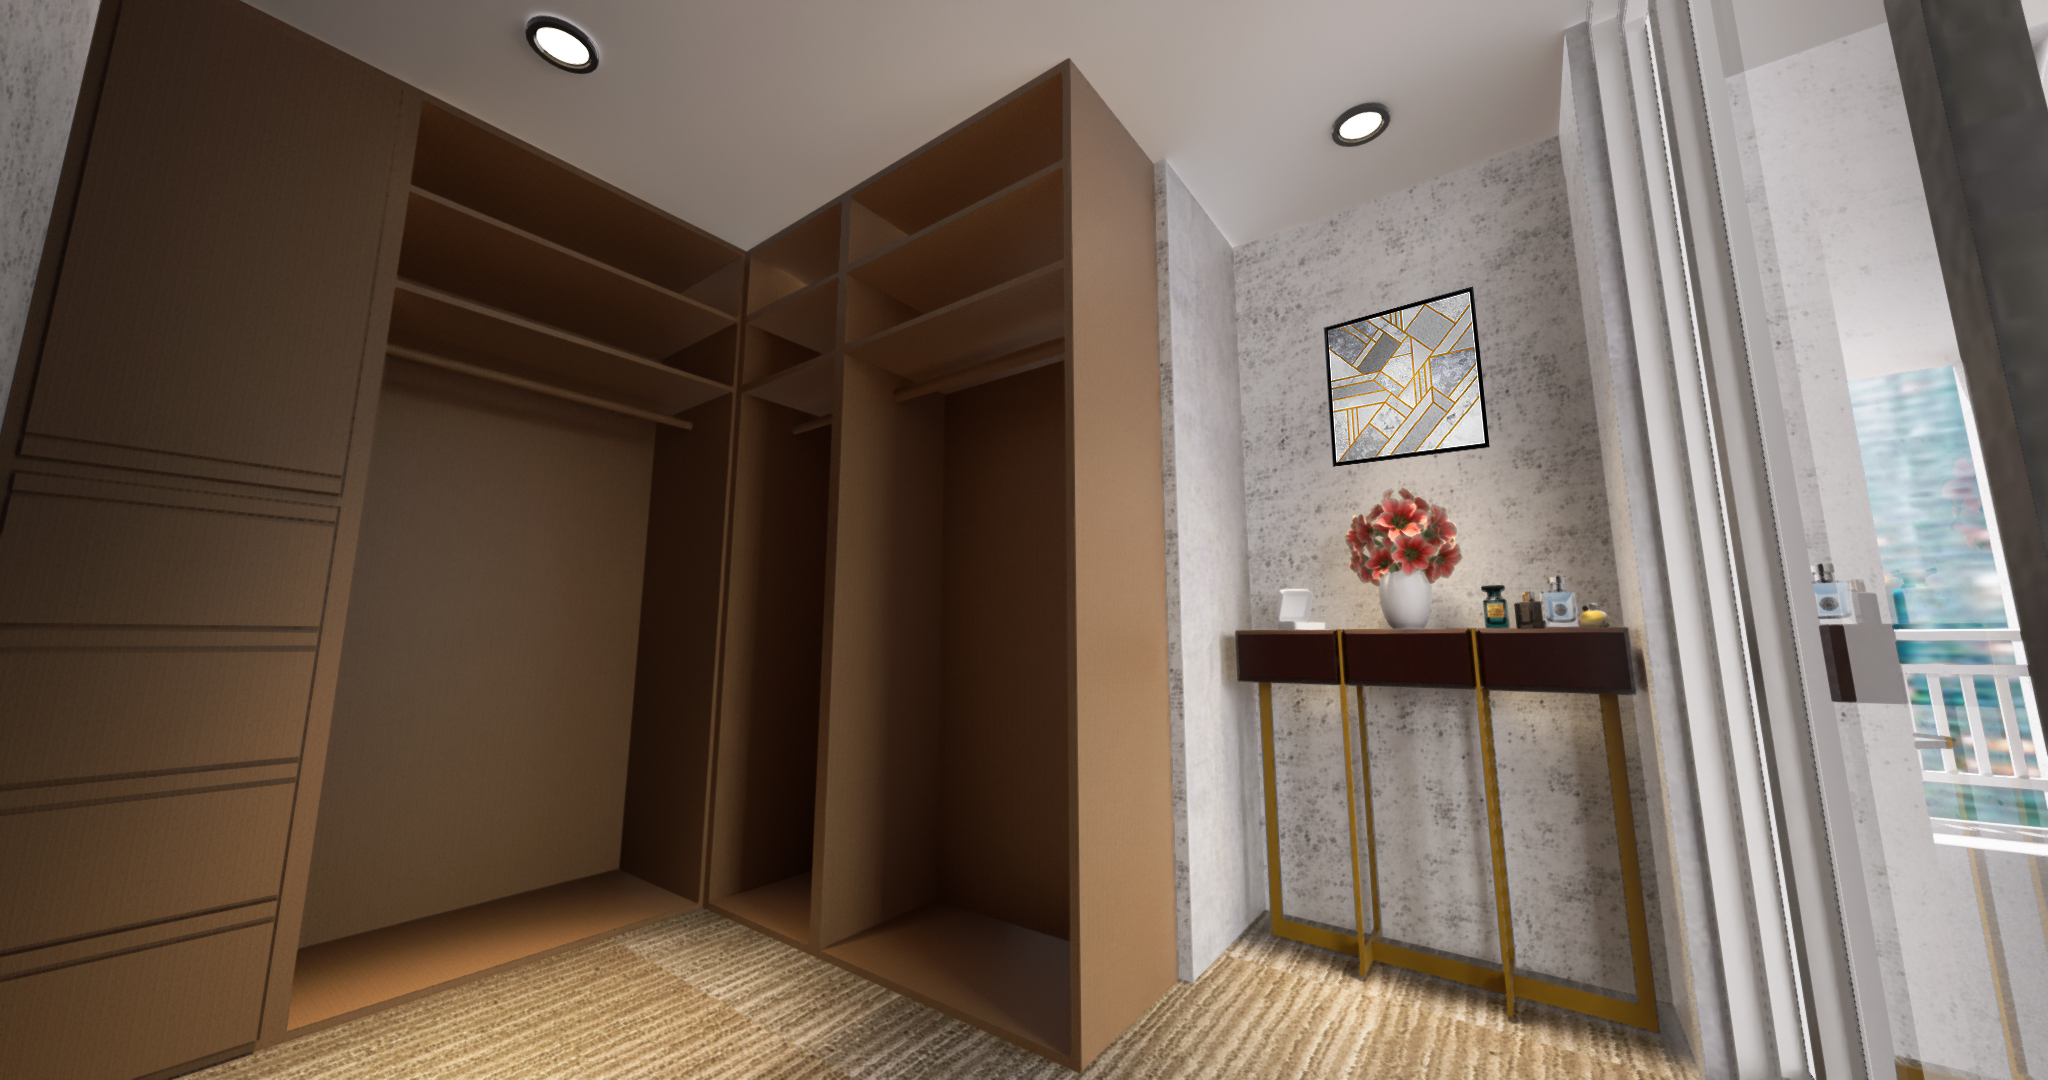 Residential Penthouse Condo - Master Bedroom Closet